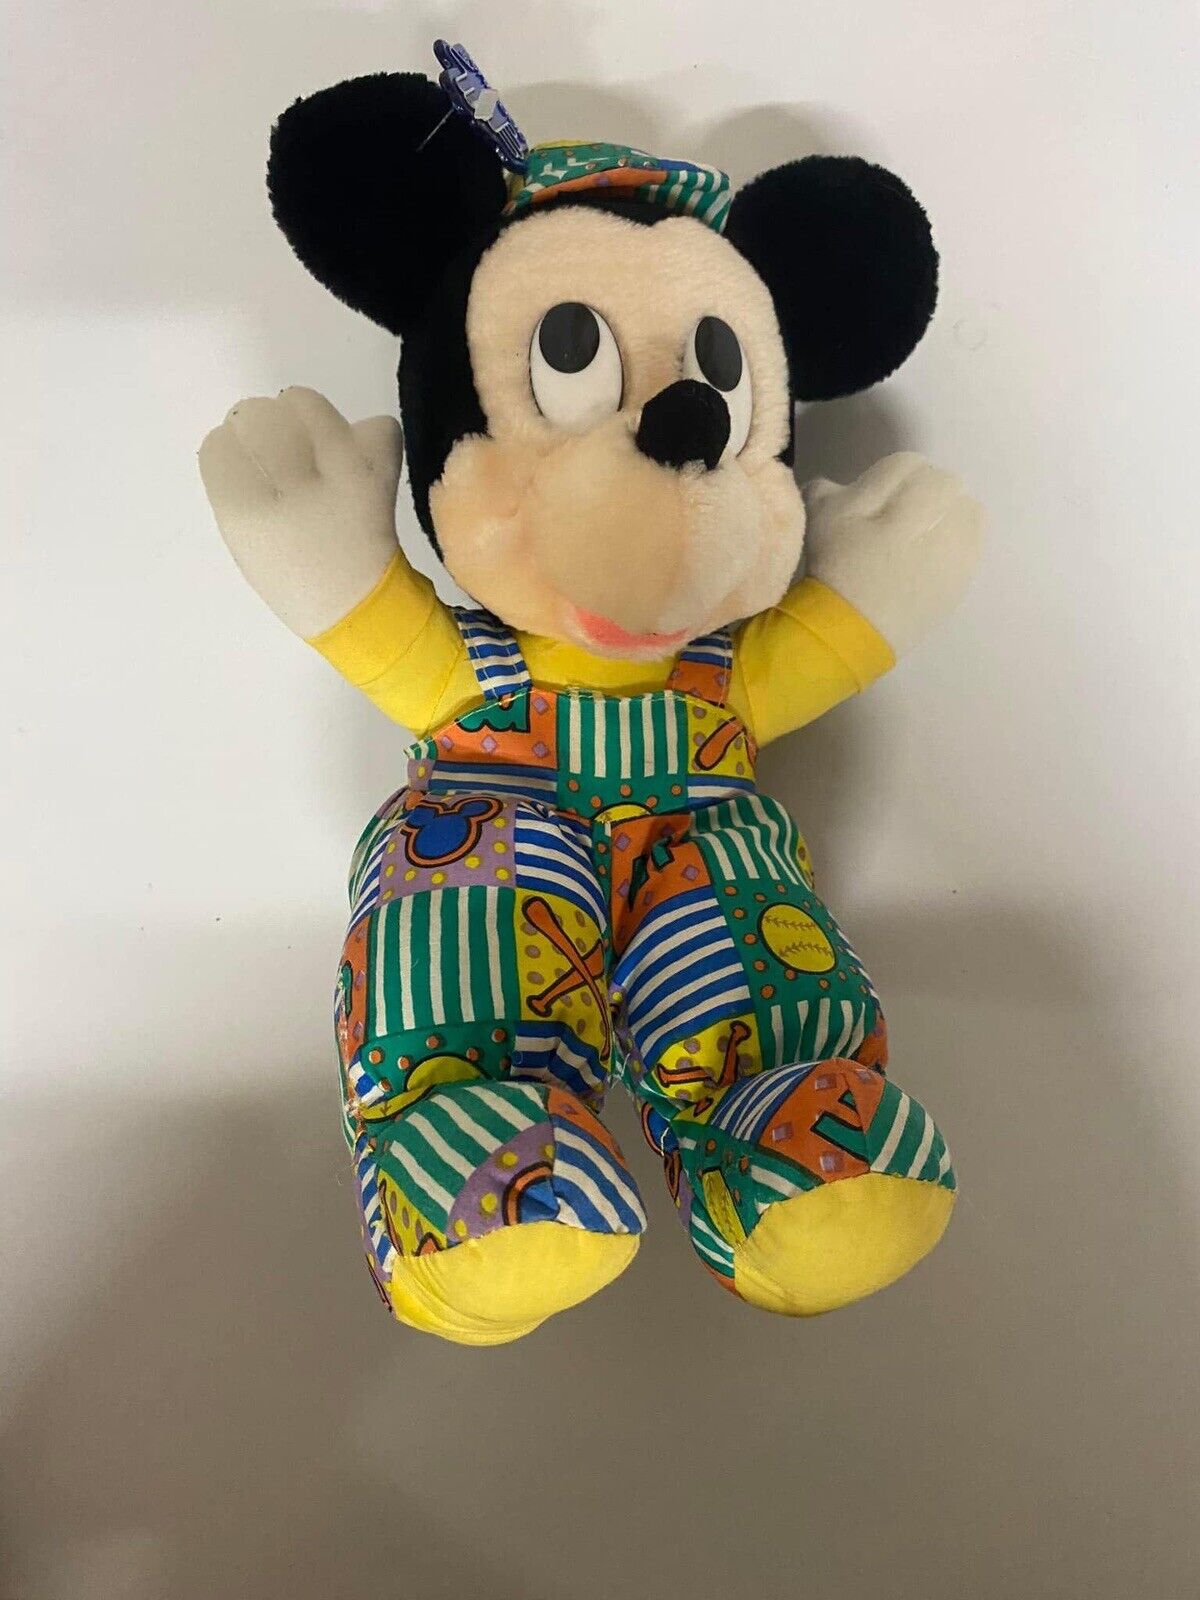 Rare Applause Mickey mouse plush  Baseball Themed Overalls Disney Toy Stuffed